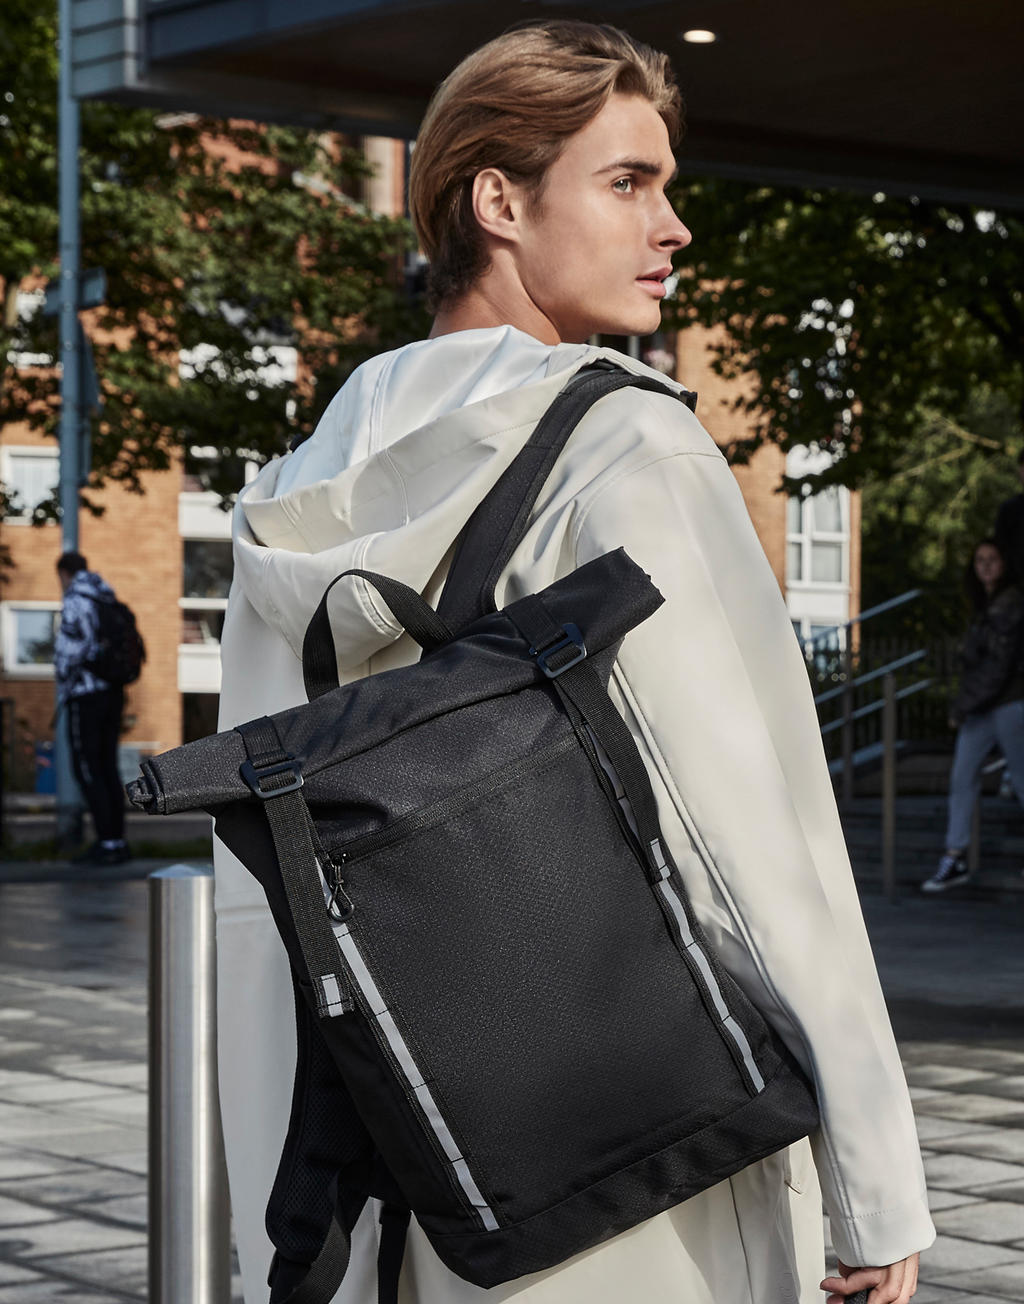  Urban Commute Backpack in Farbe Black